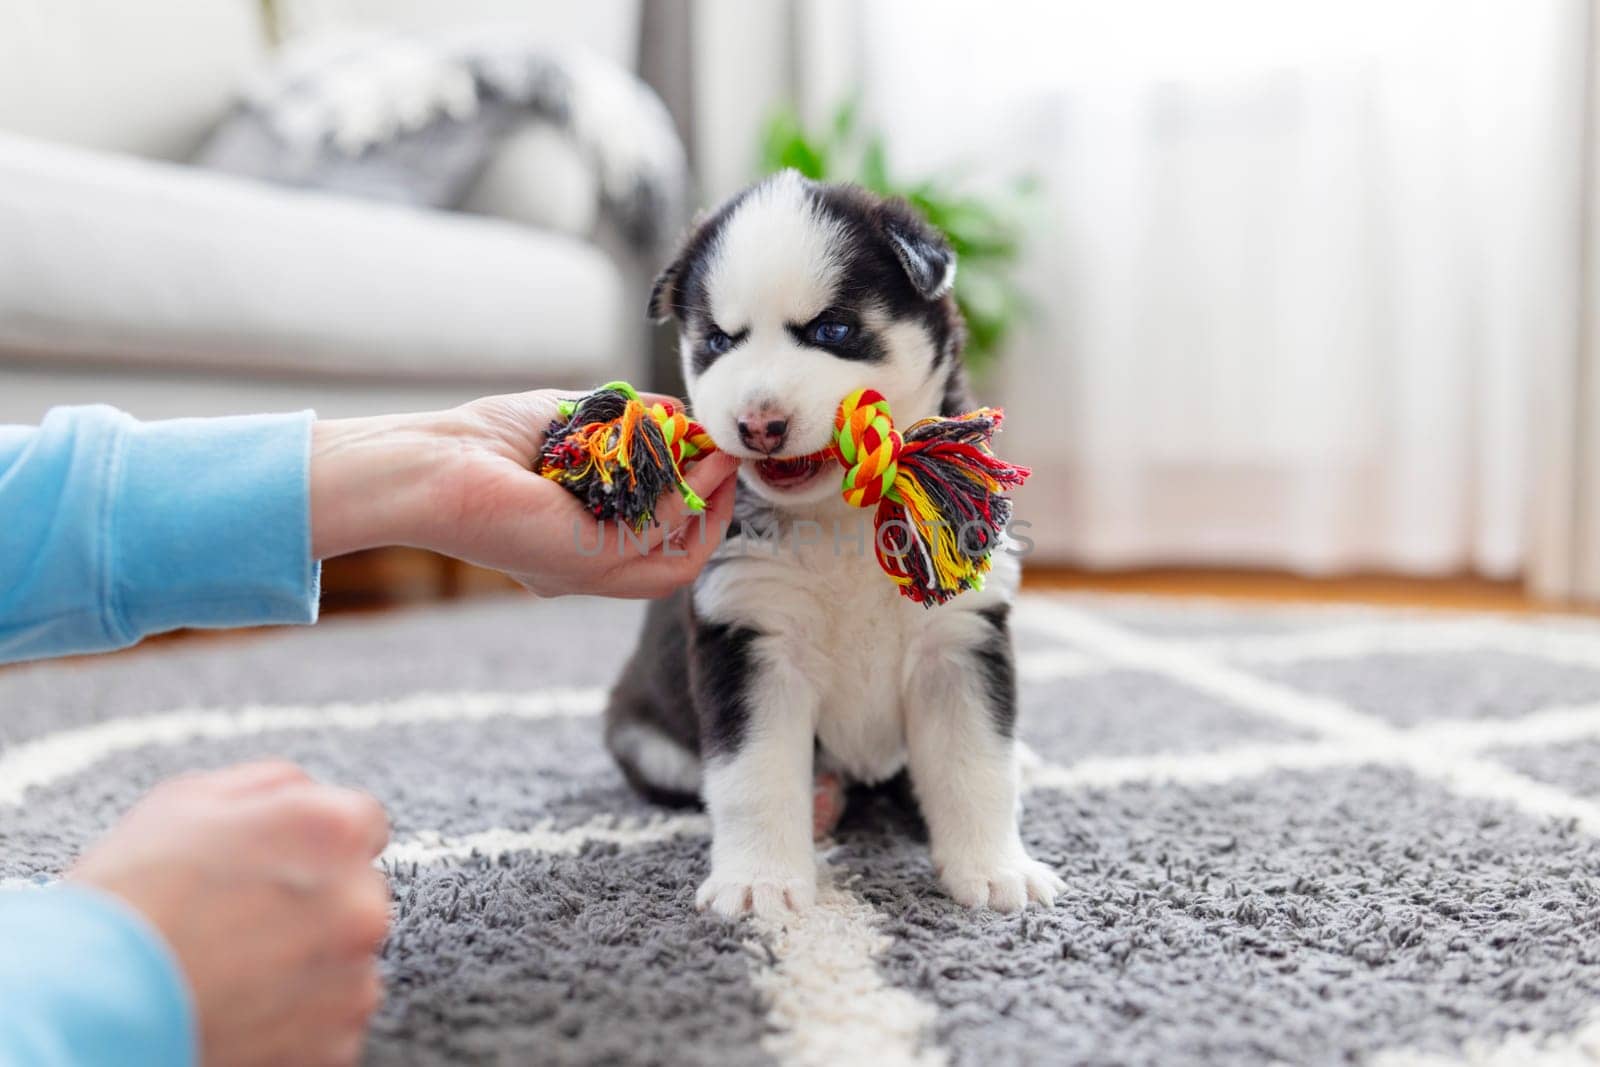 Husky Puppy Chewing Colorful Rope Toy by andreyz